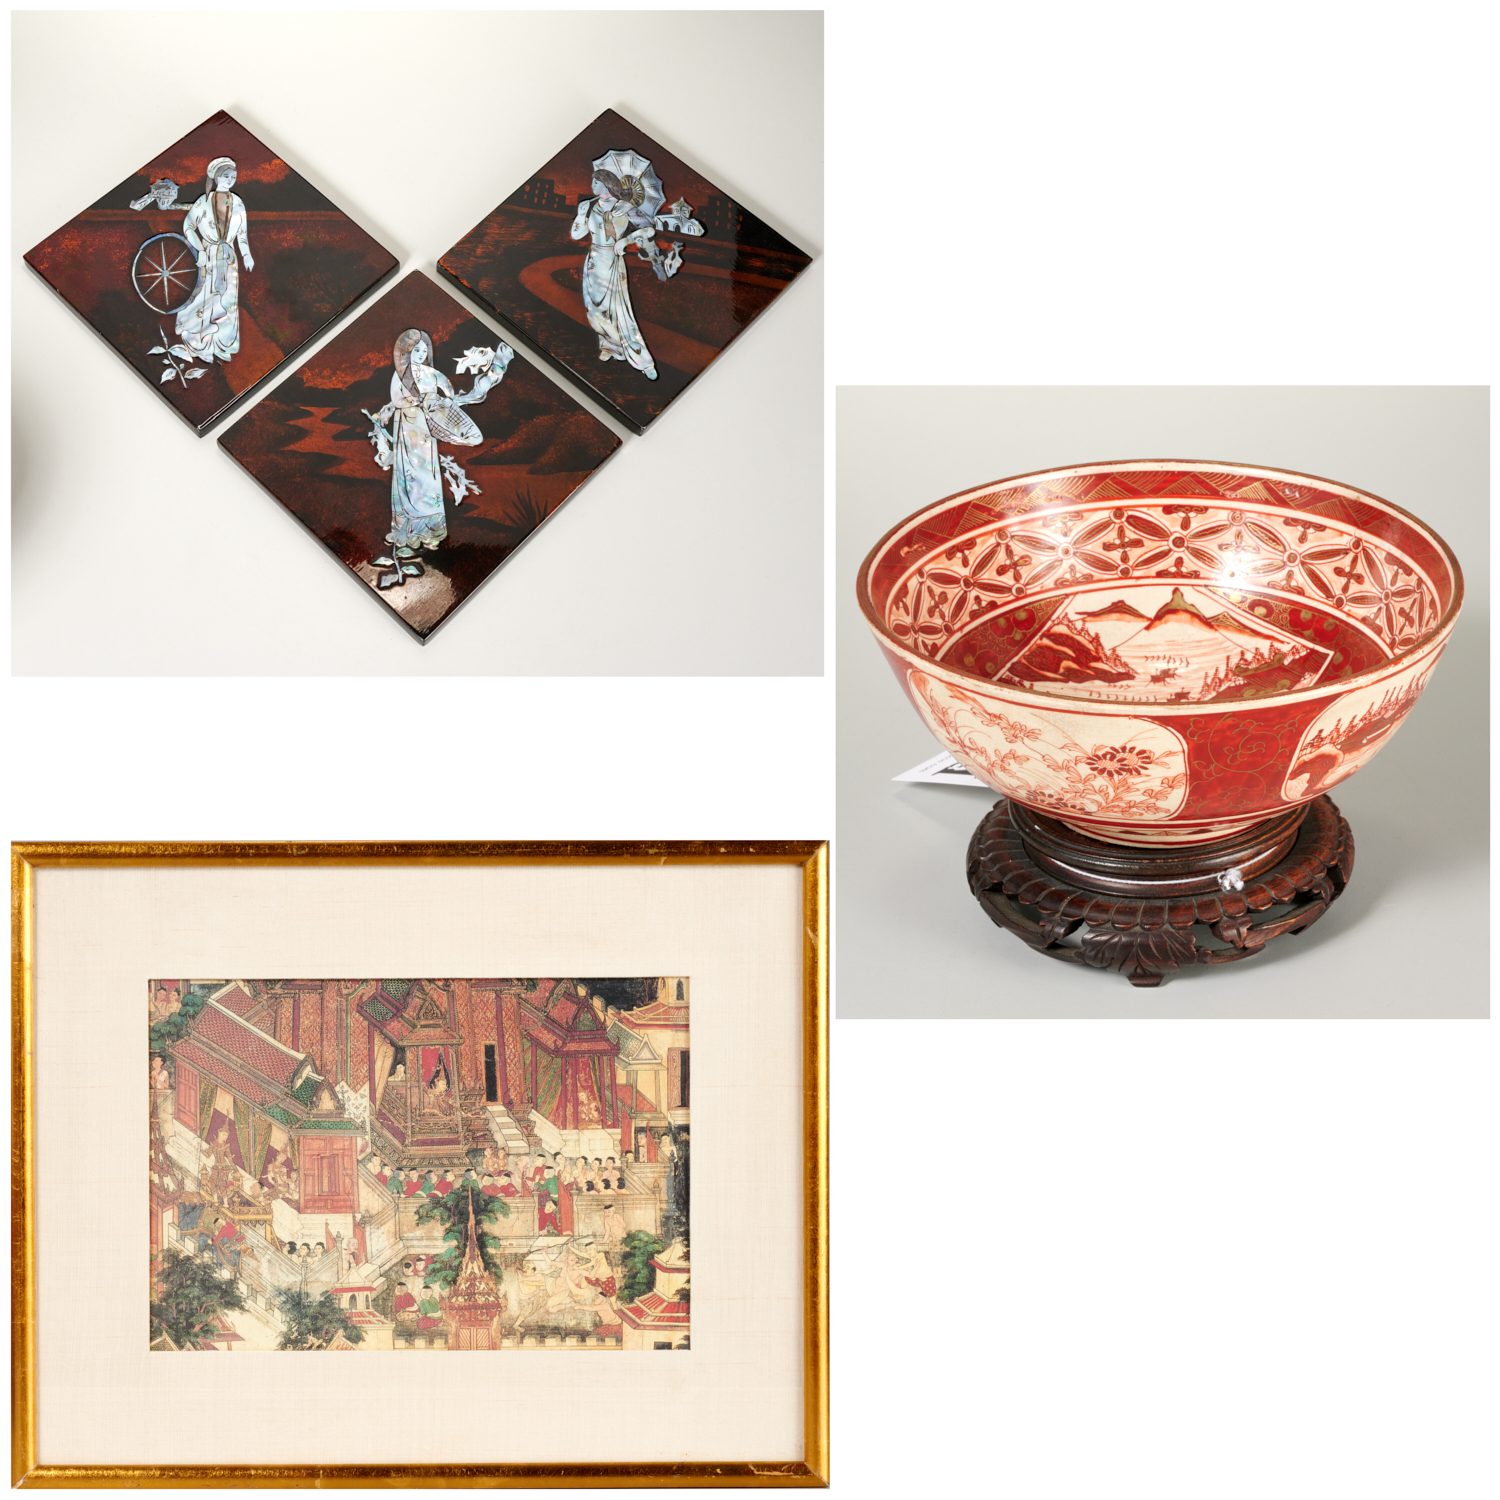 JAPANESE PLAQUES, PRINT, AND PORCELAIN